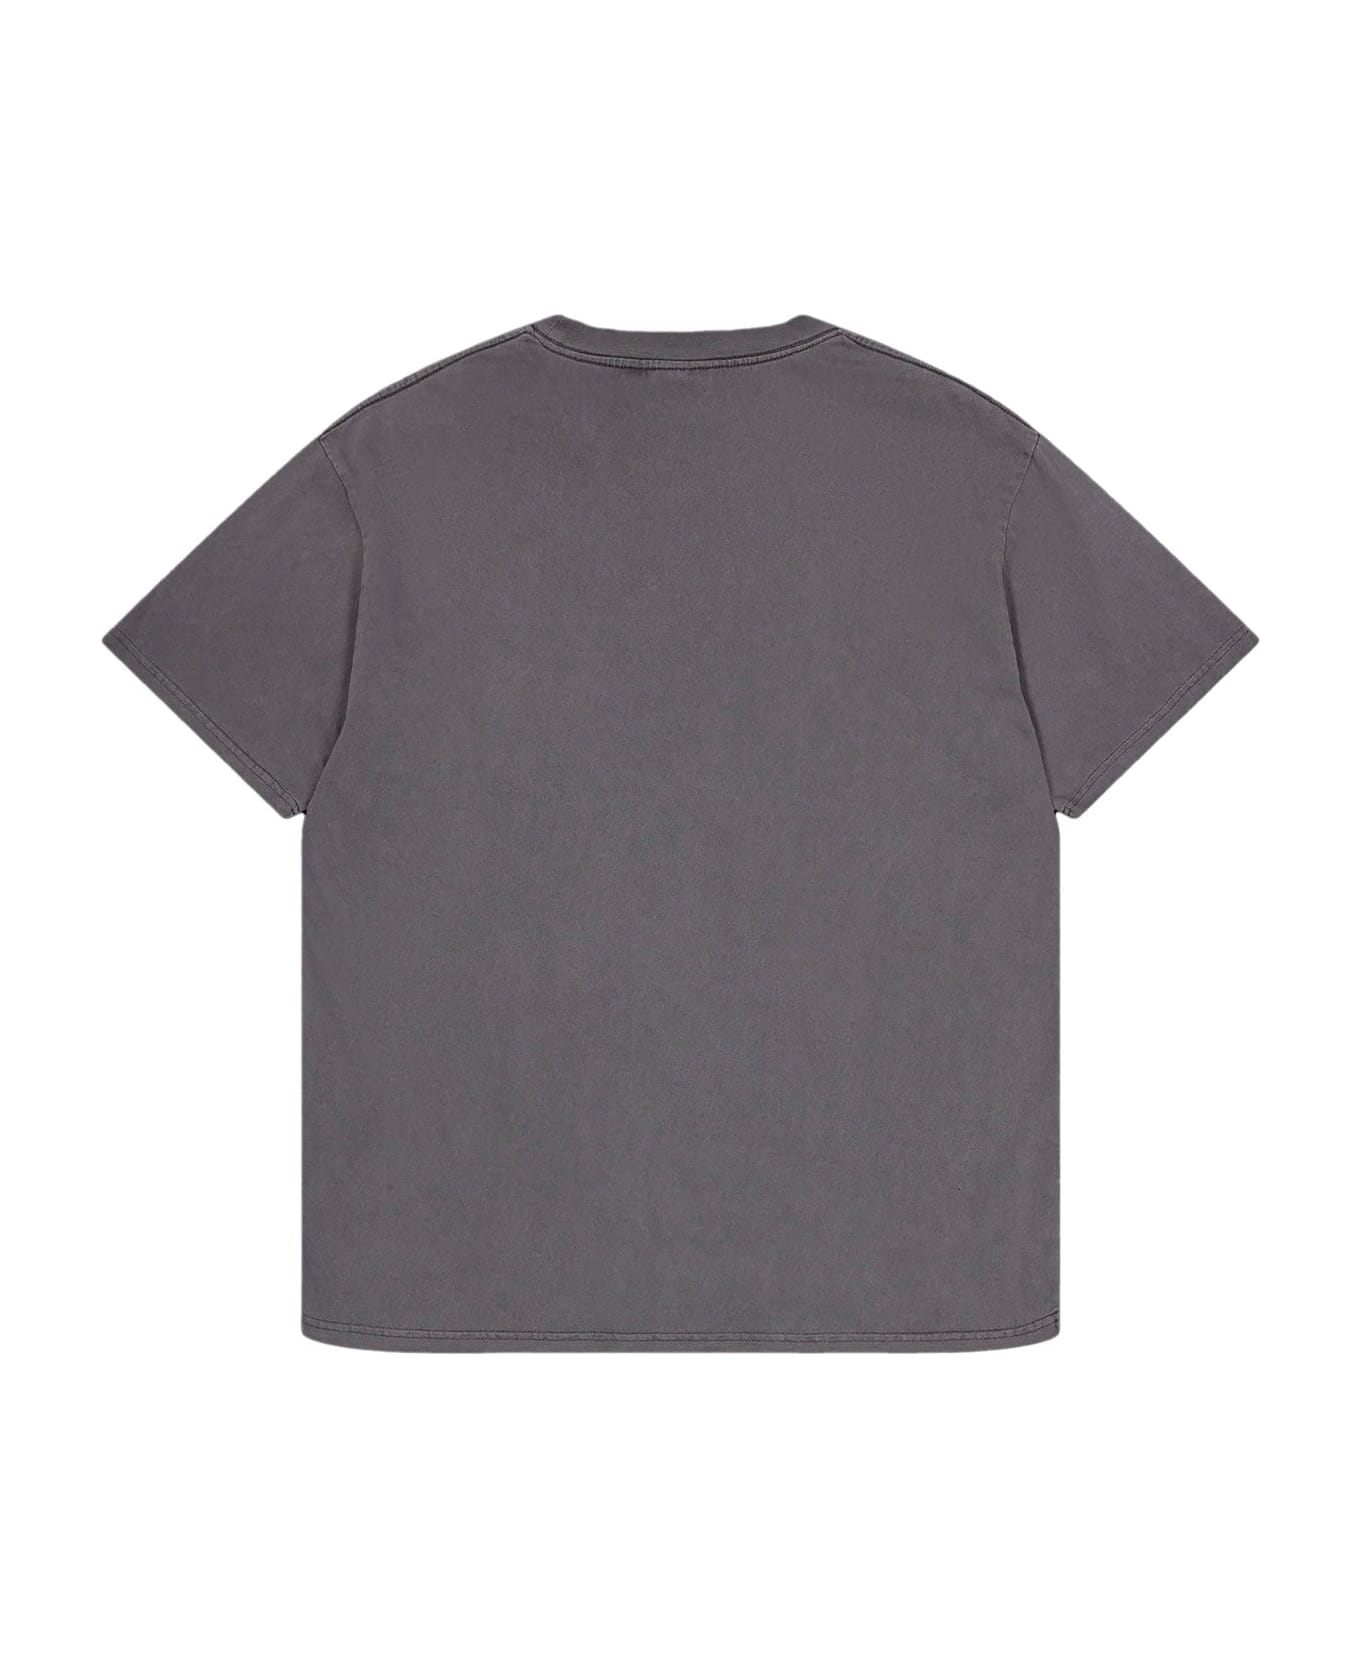 Gramicci One Point Tee - Grey Pigment シャツ